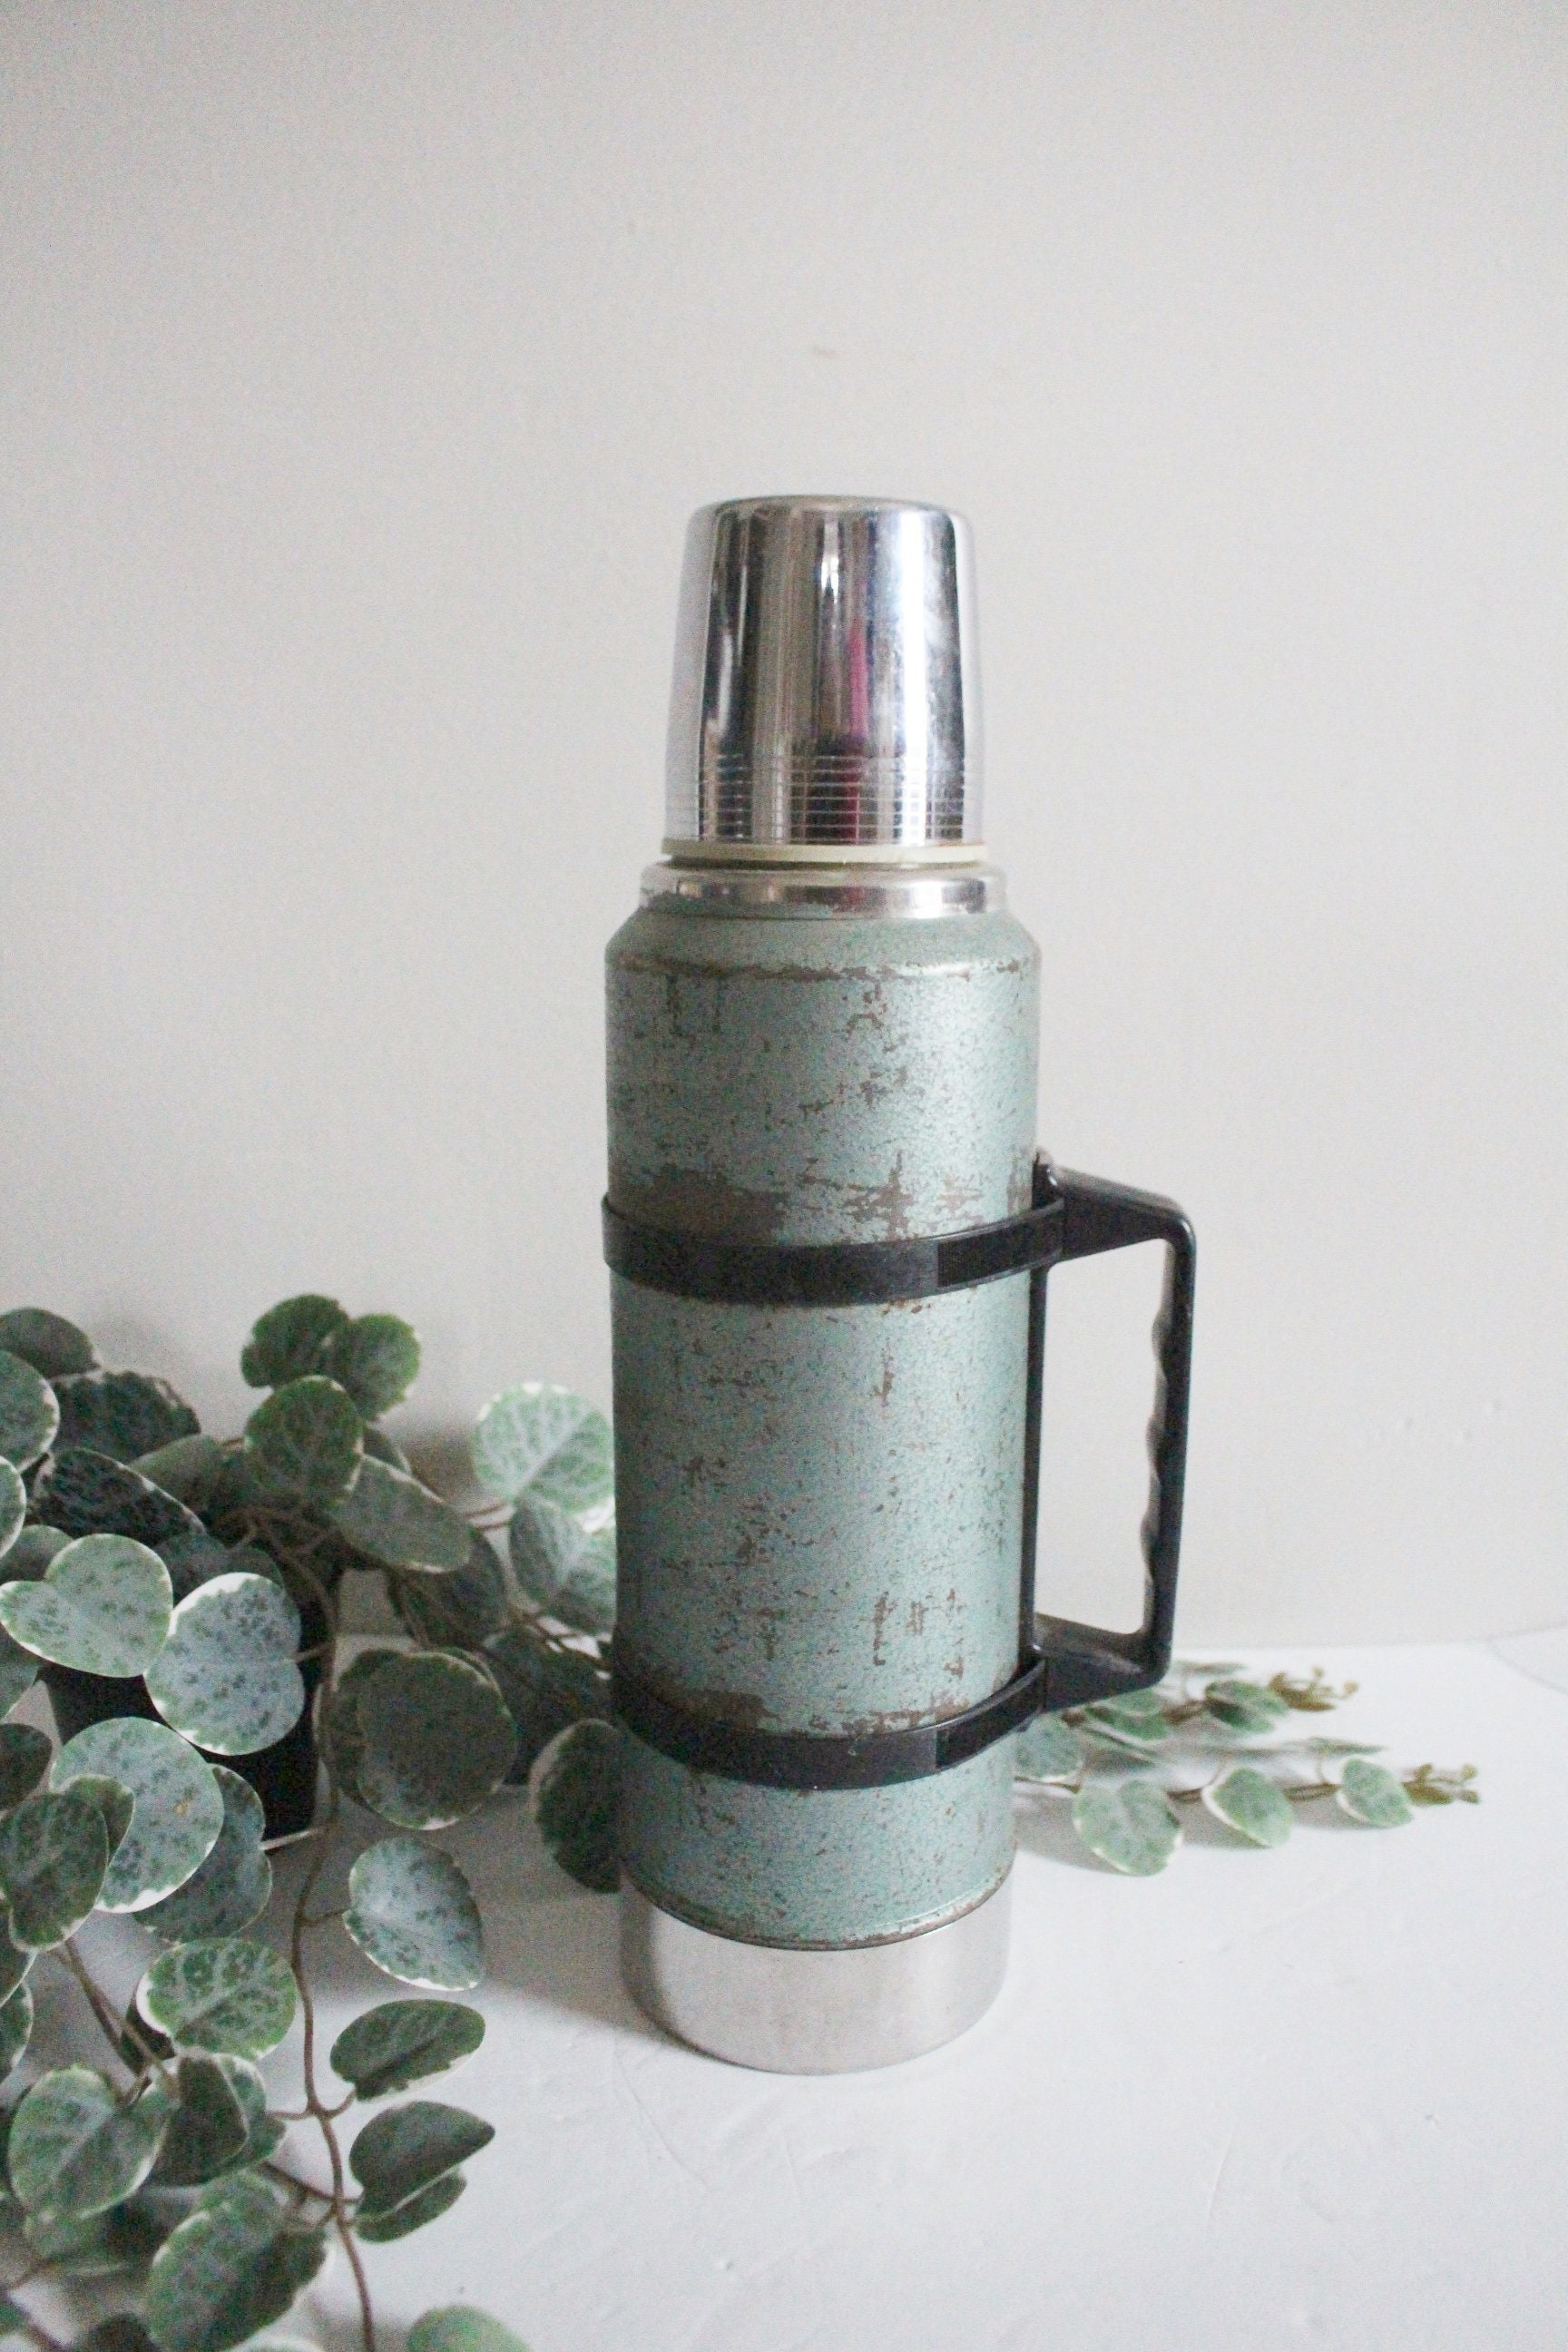 Stanley Classic Thermos Green Vacuum Bottle Coffee Cold Hot Drink Camping  Patina